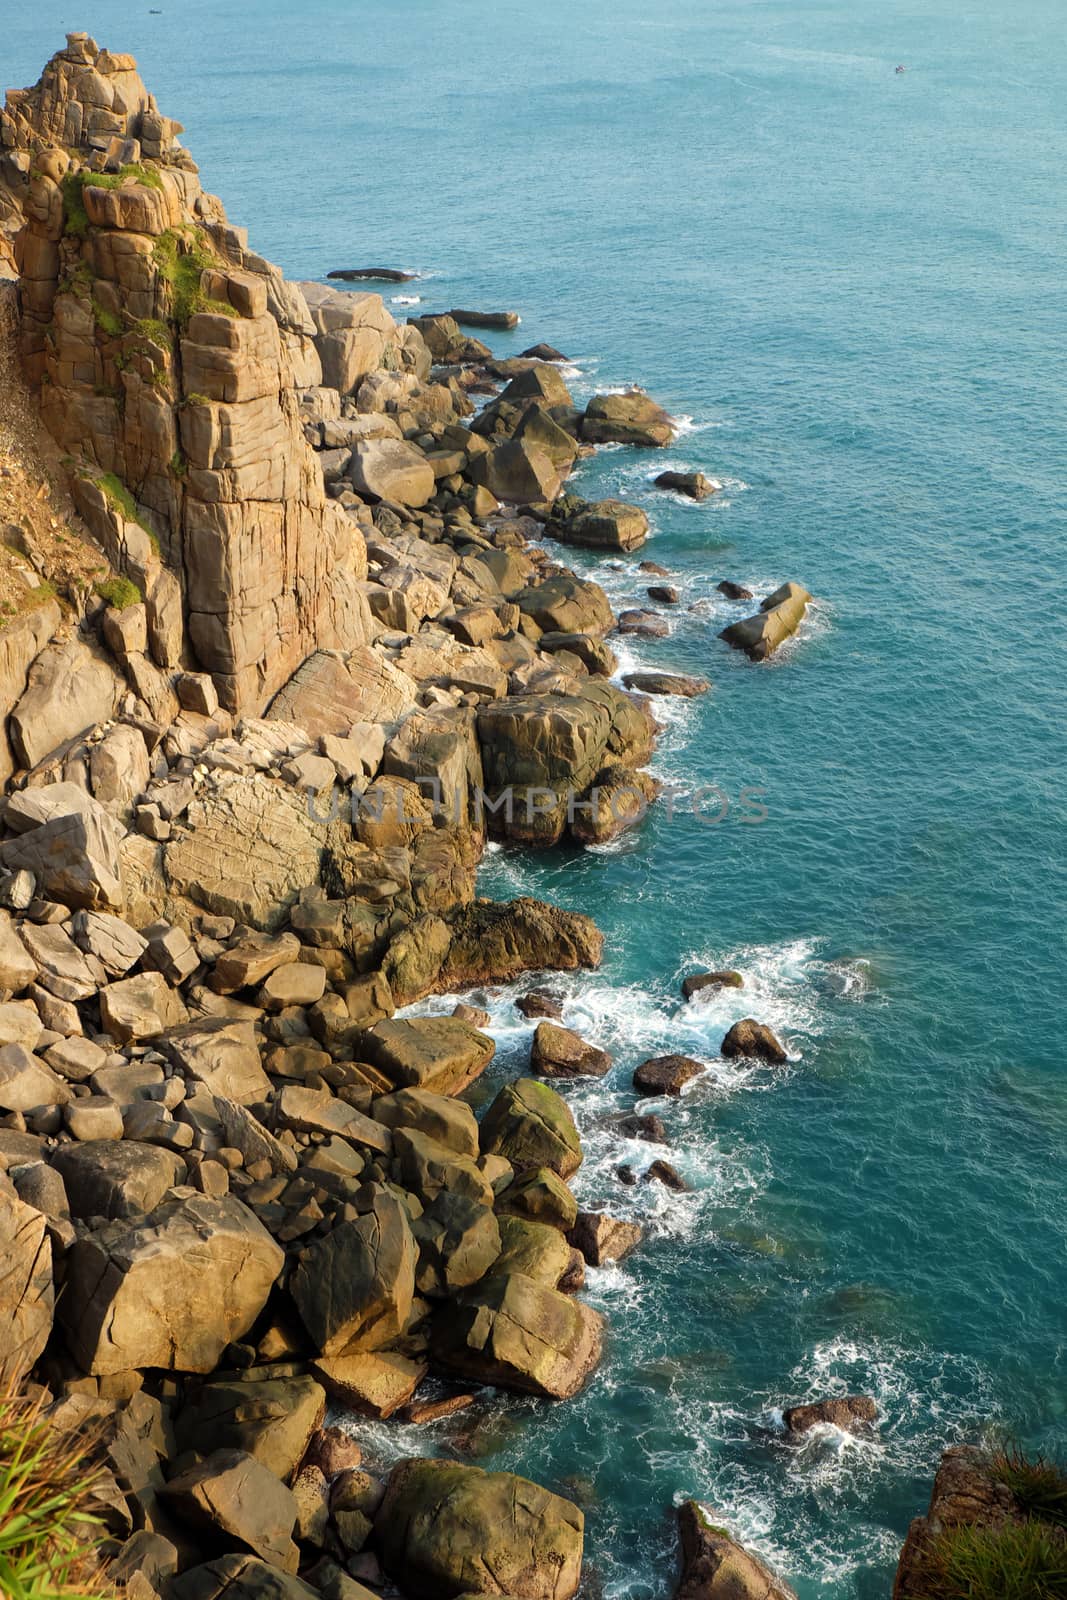  Landscape of sea from Dai Lanh cape, Phu Yen, Viet Nam, amzing scene with rock, stone, beautiful place for Vietnam travel